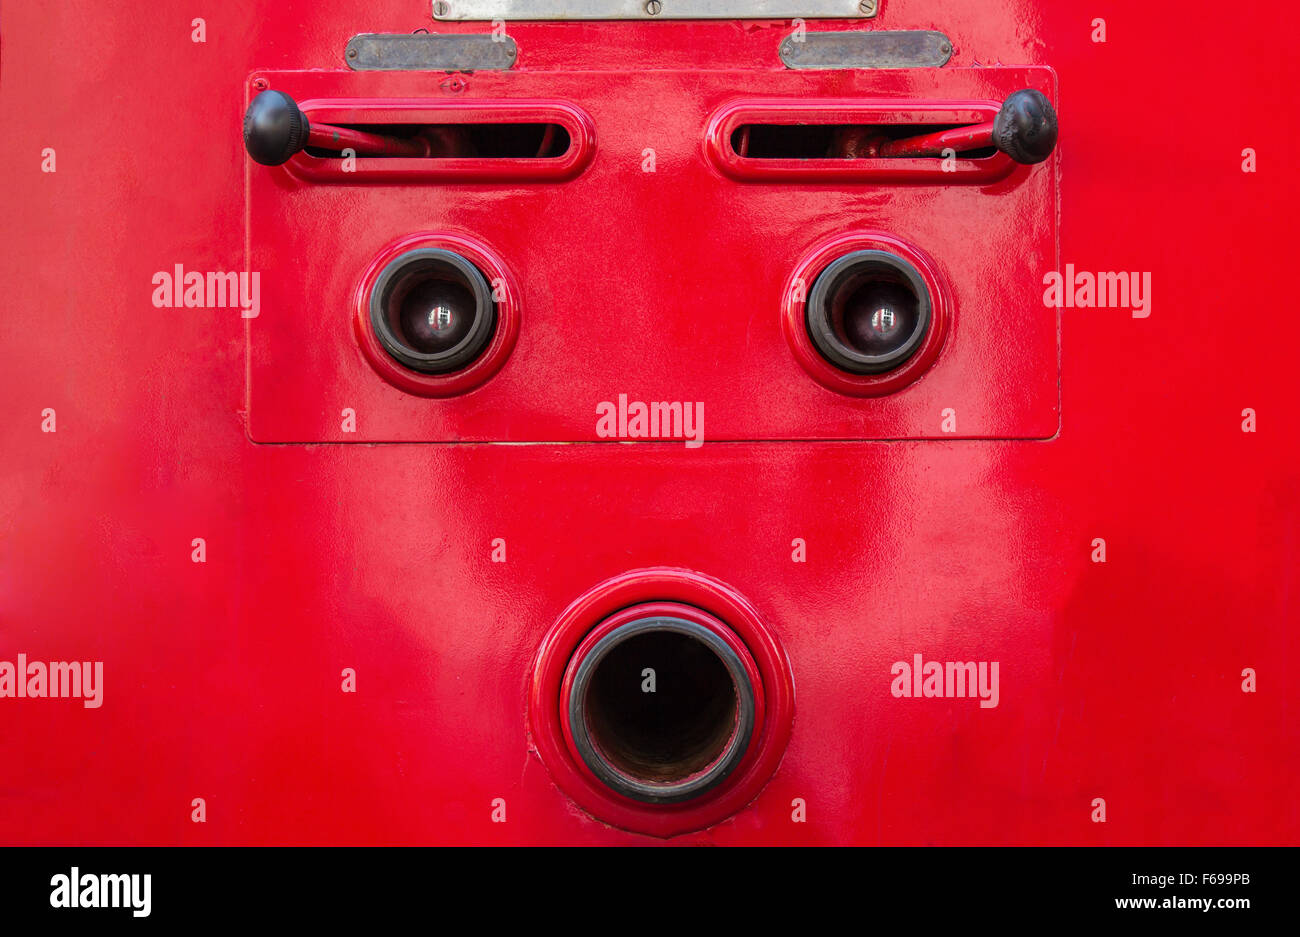 Valve control of fire truck look like human face Stock Photo